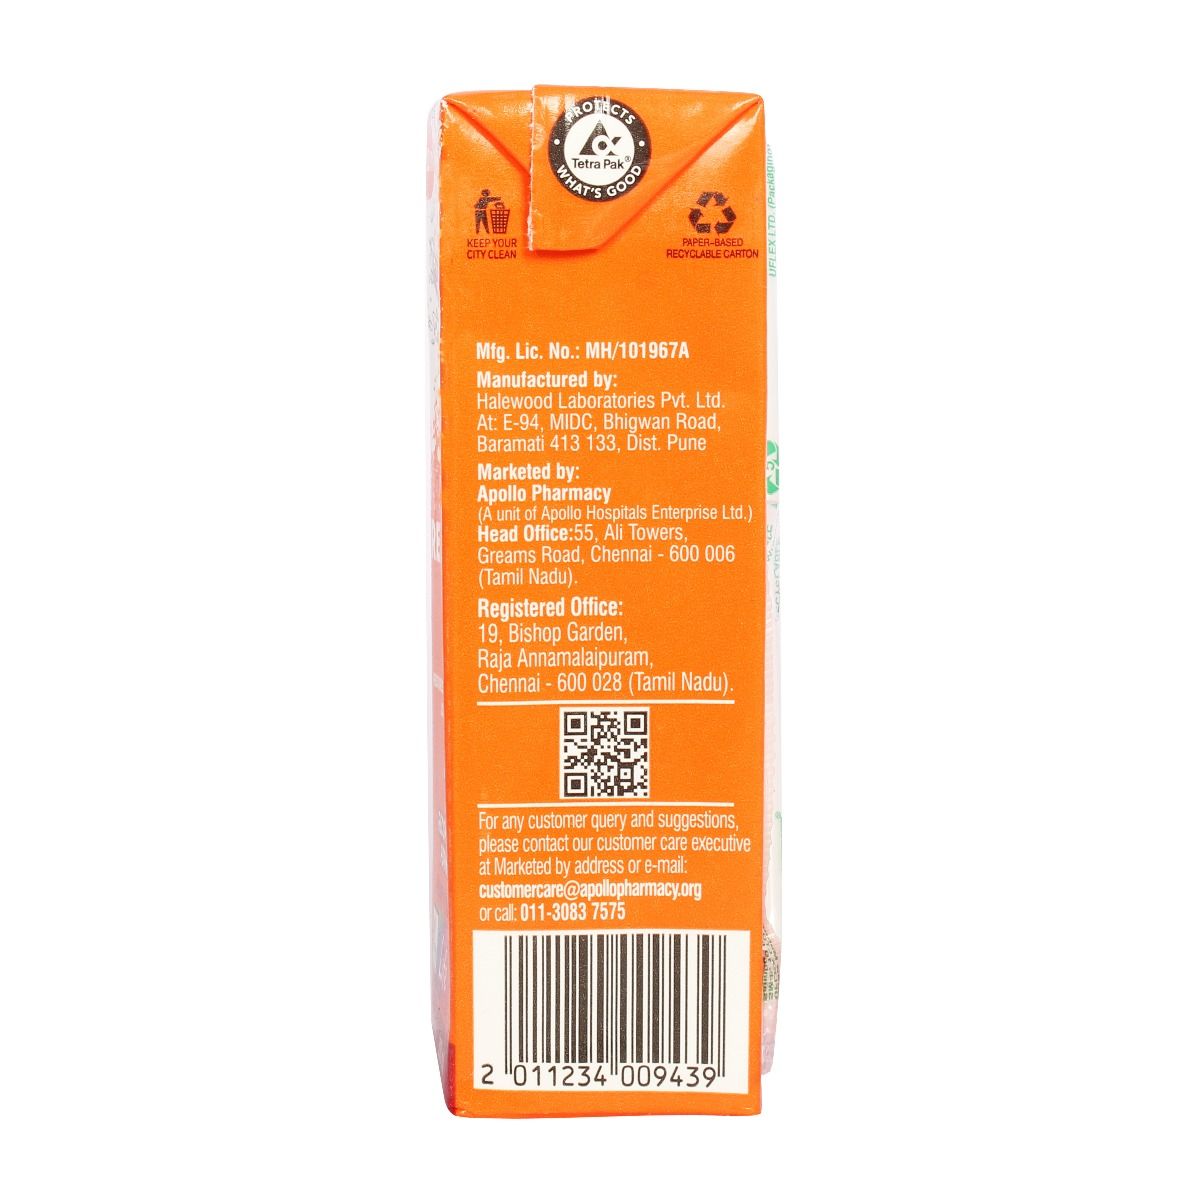 Apollo Pharmacy ORS Orange Flavour Drink, 200 ml, Pack of 1 